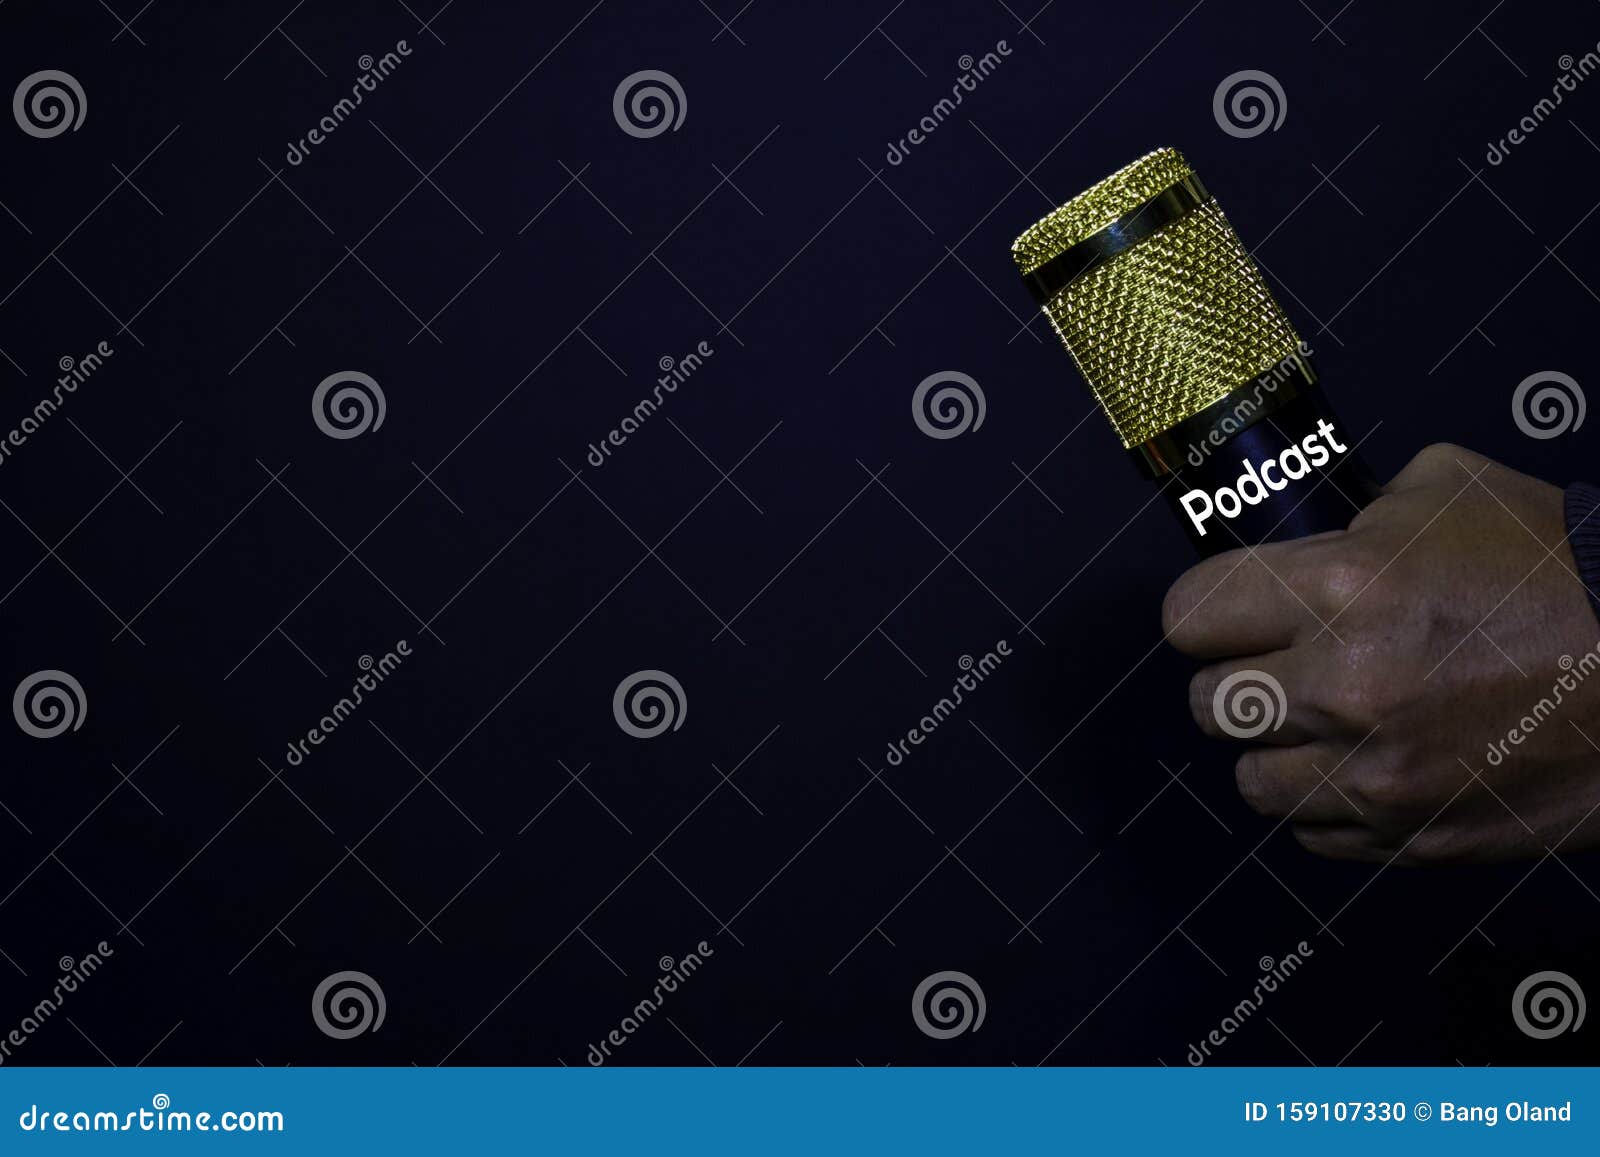 profesional microphone on hands  black background. podcast concept